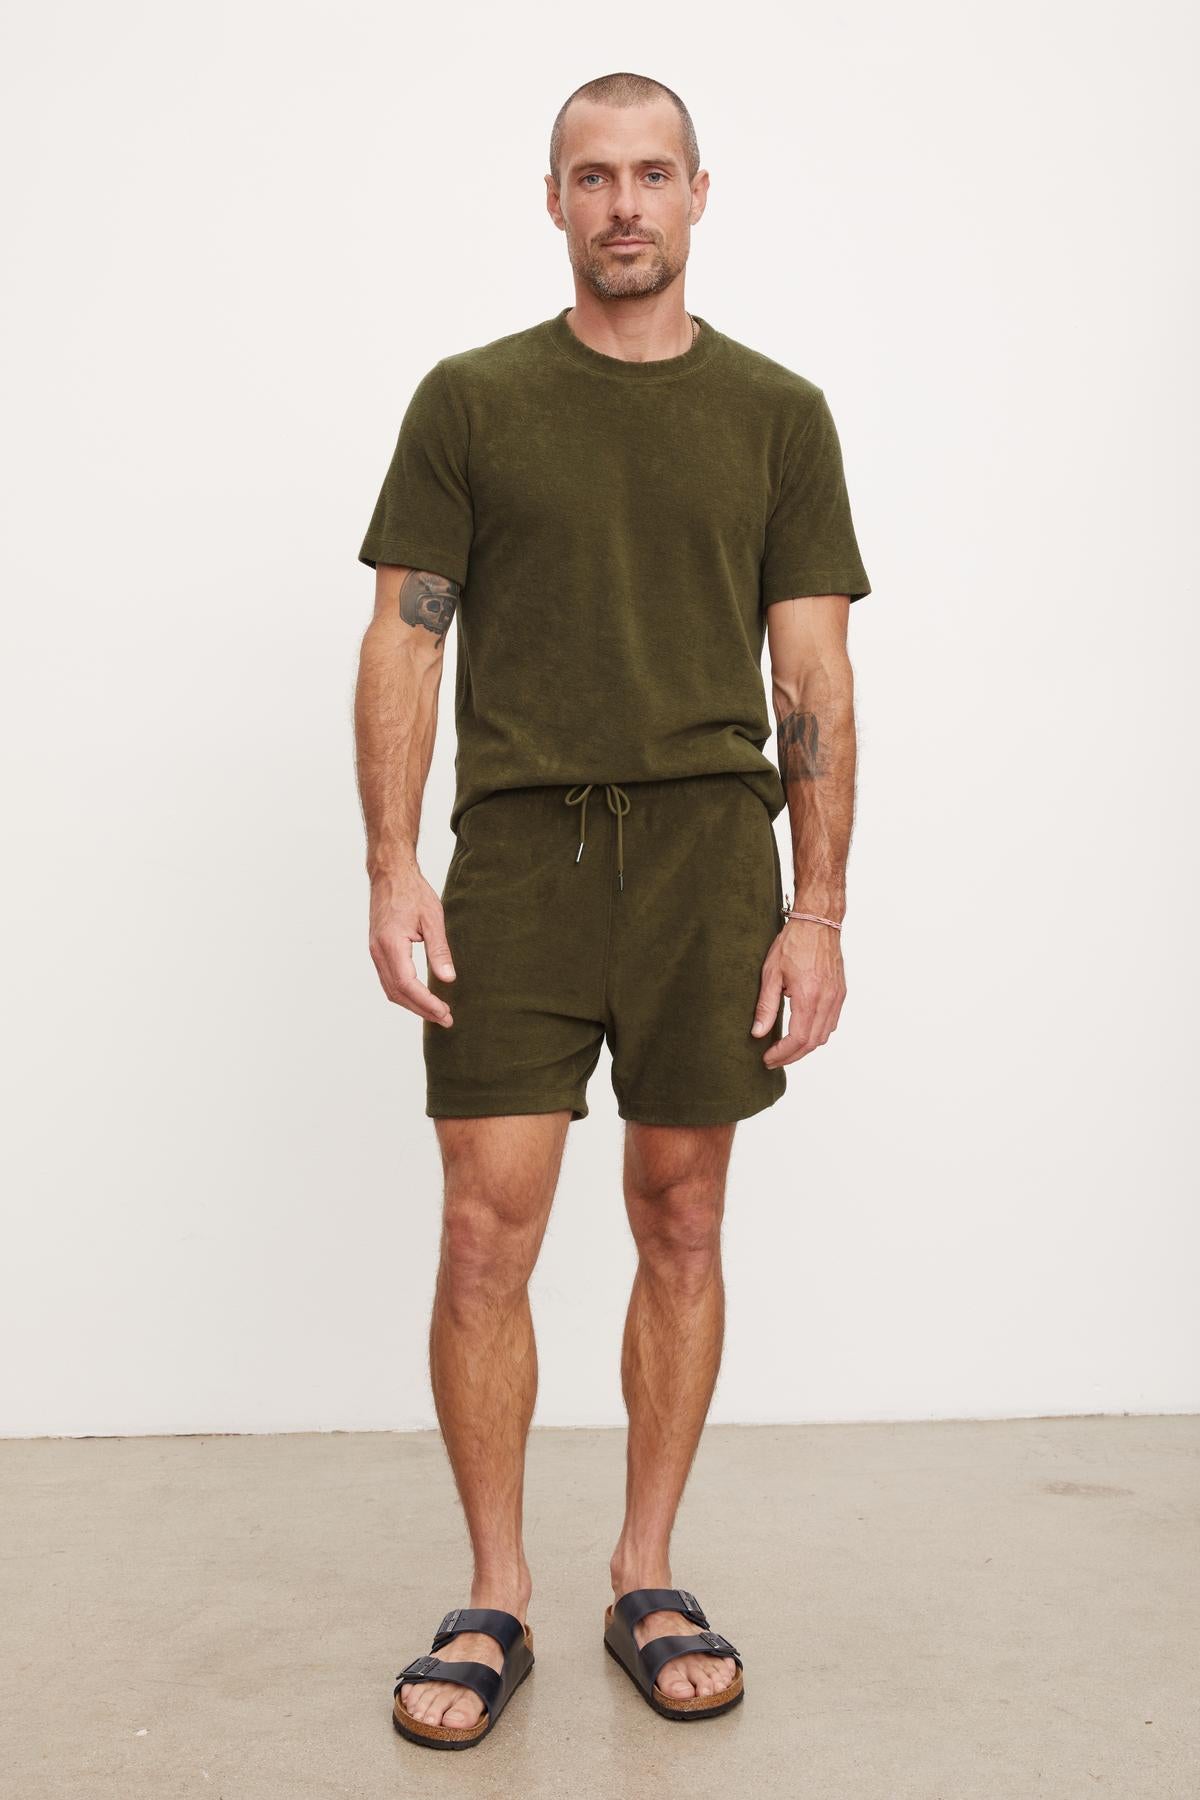 Man in a green t-shirt and Velvet by Graham & Spencer Salem shorts standing against a plain background, wearing black sandals.-36753587667137